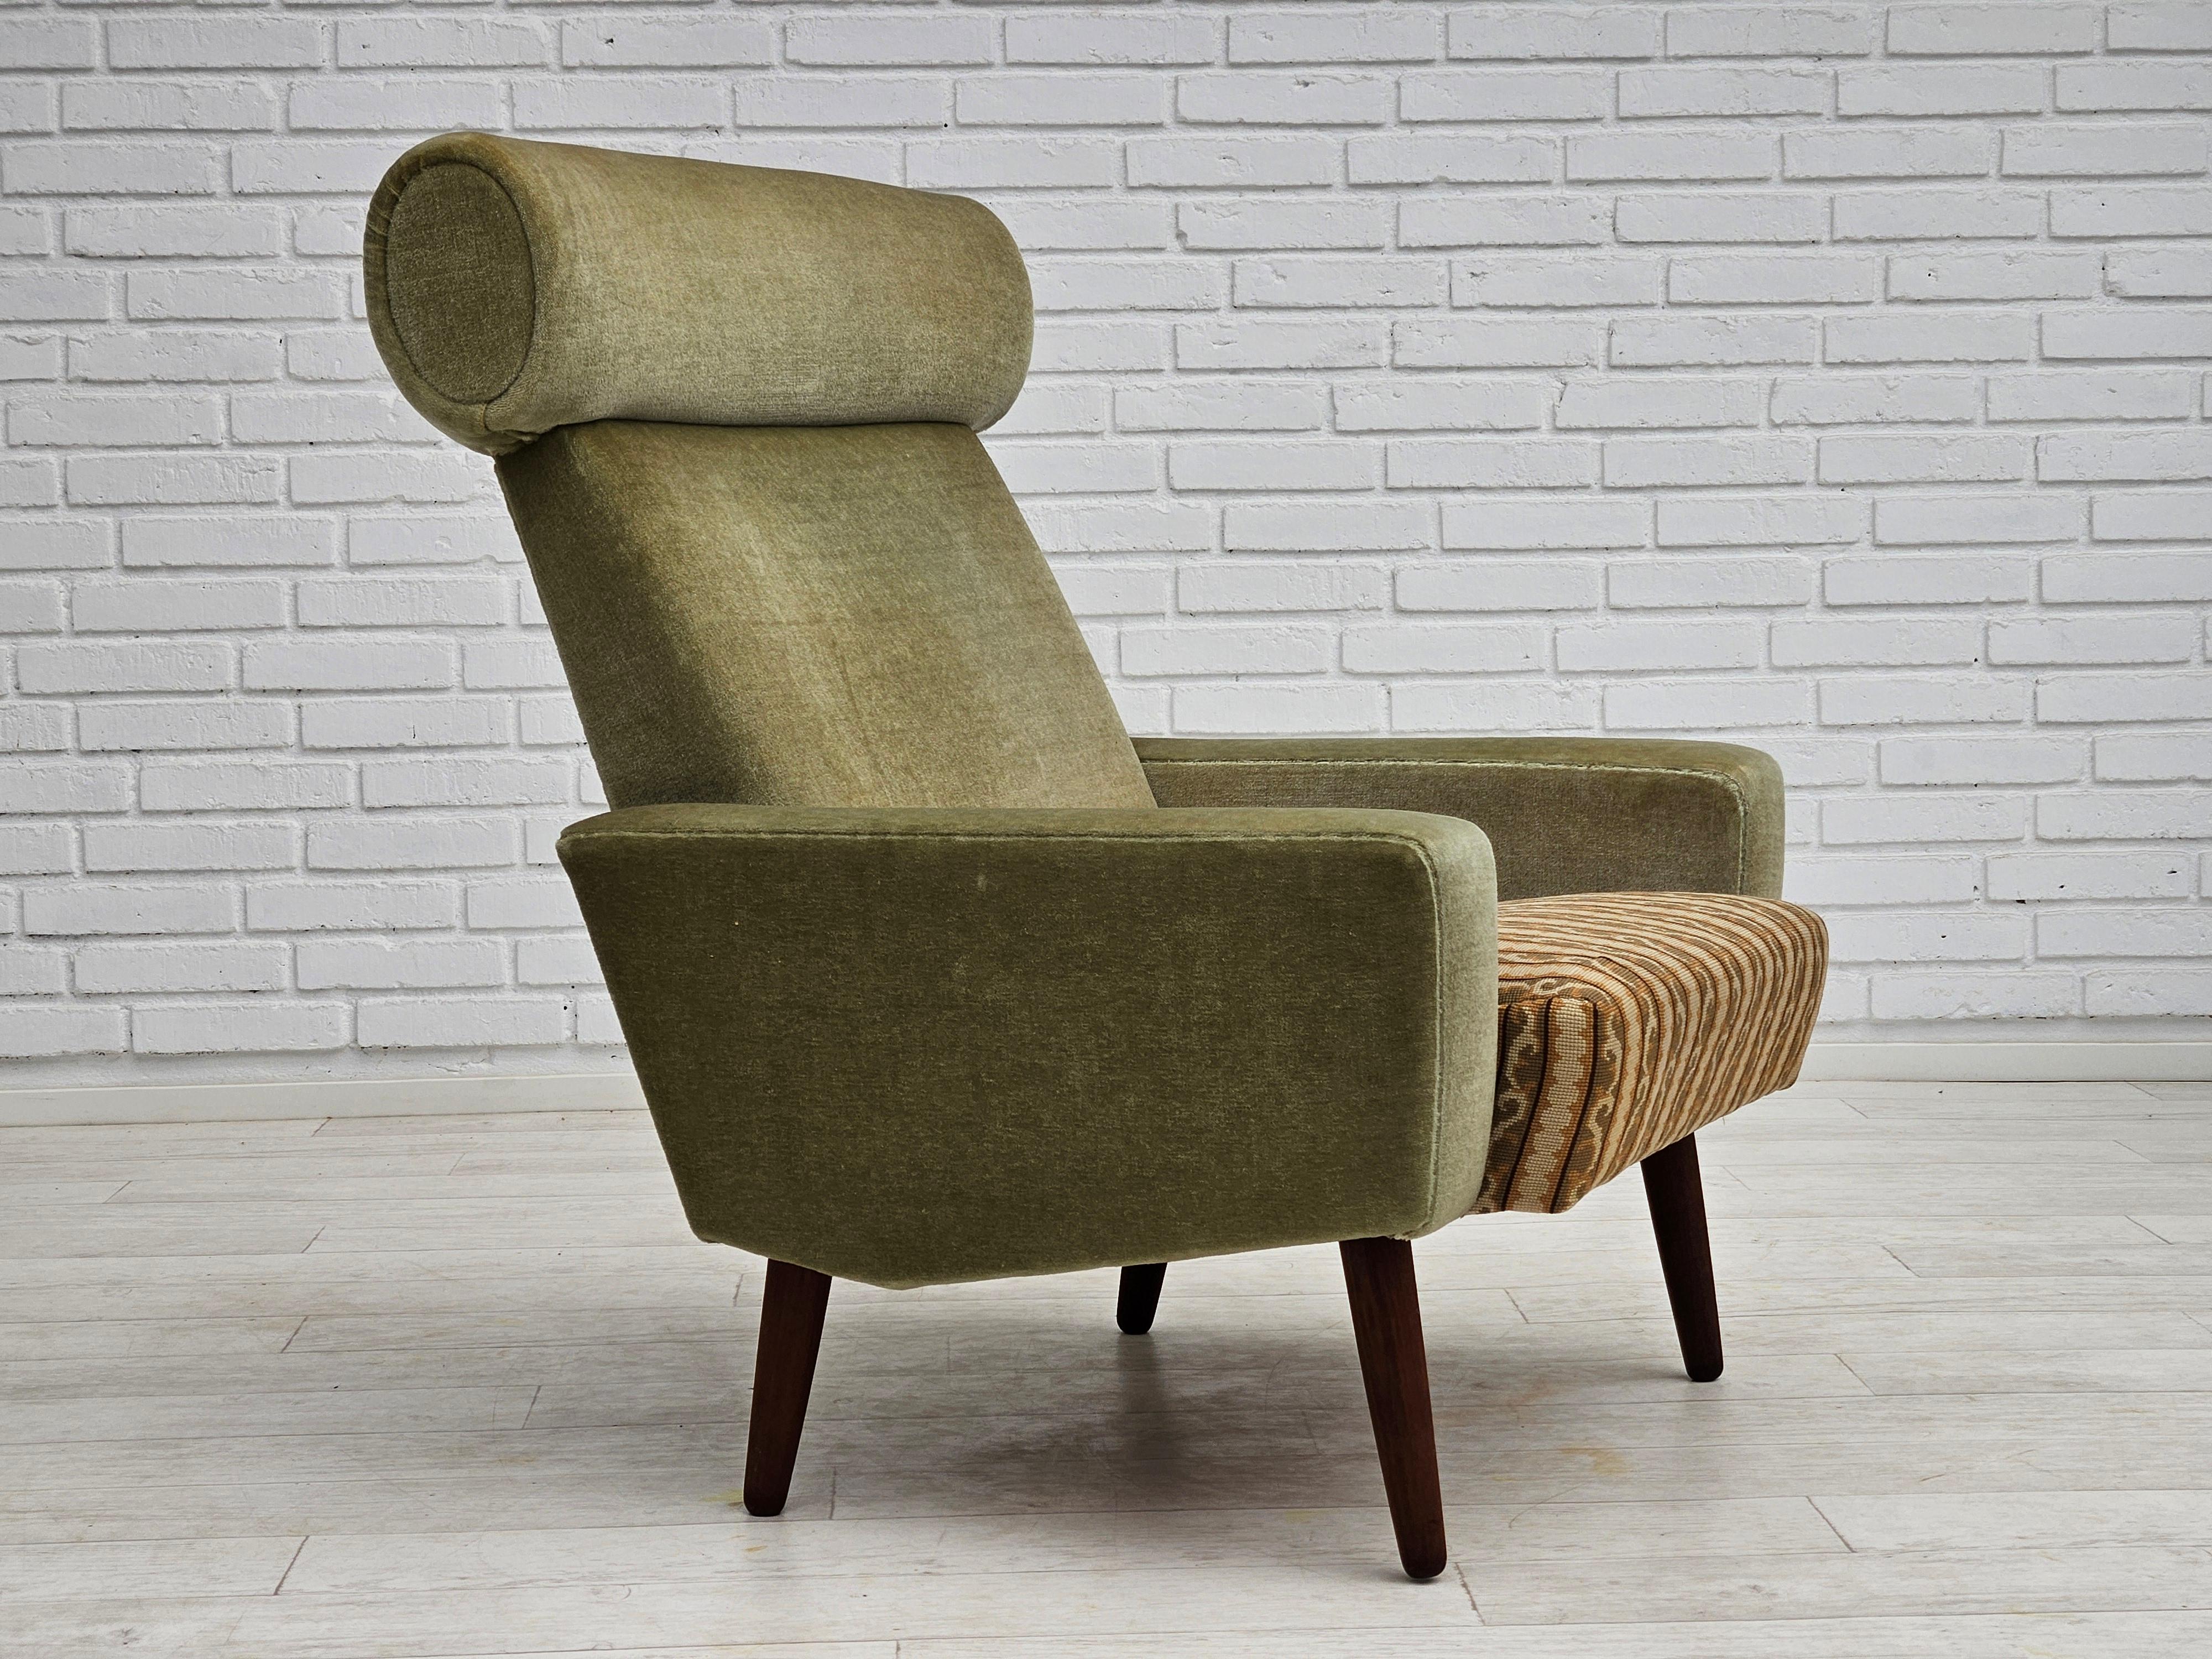 1970s, Danish armchair in original very good condition: no smells and no stains. Original light green furniture velour, woven wool fabric on the seat. Teakwood legs, springs in the seat. Manufactured by Danish furniture manufacturer in about